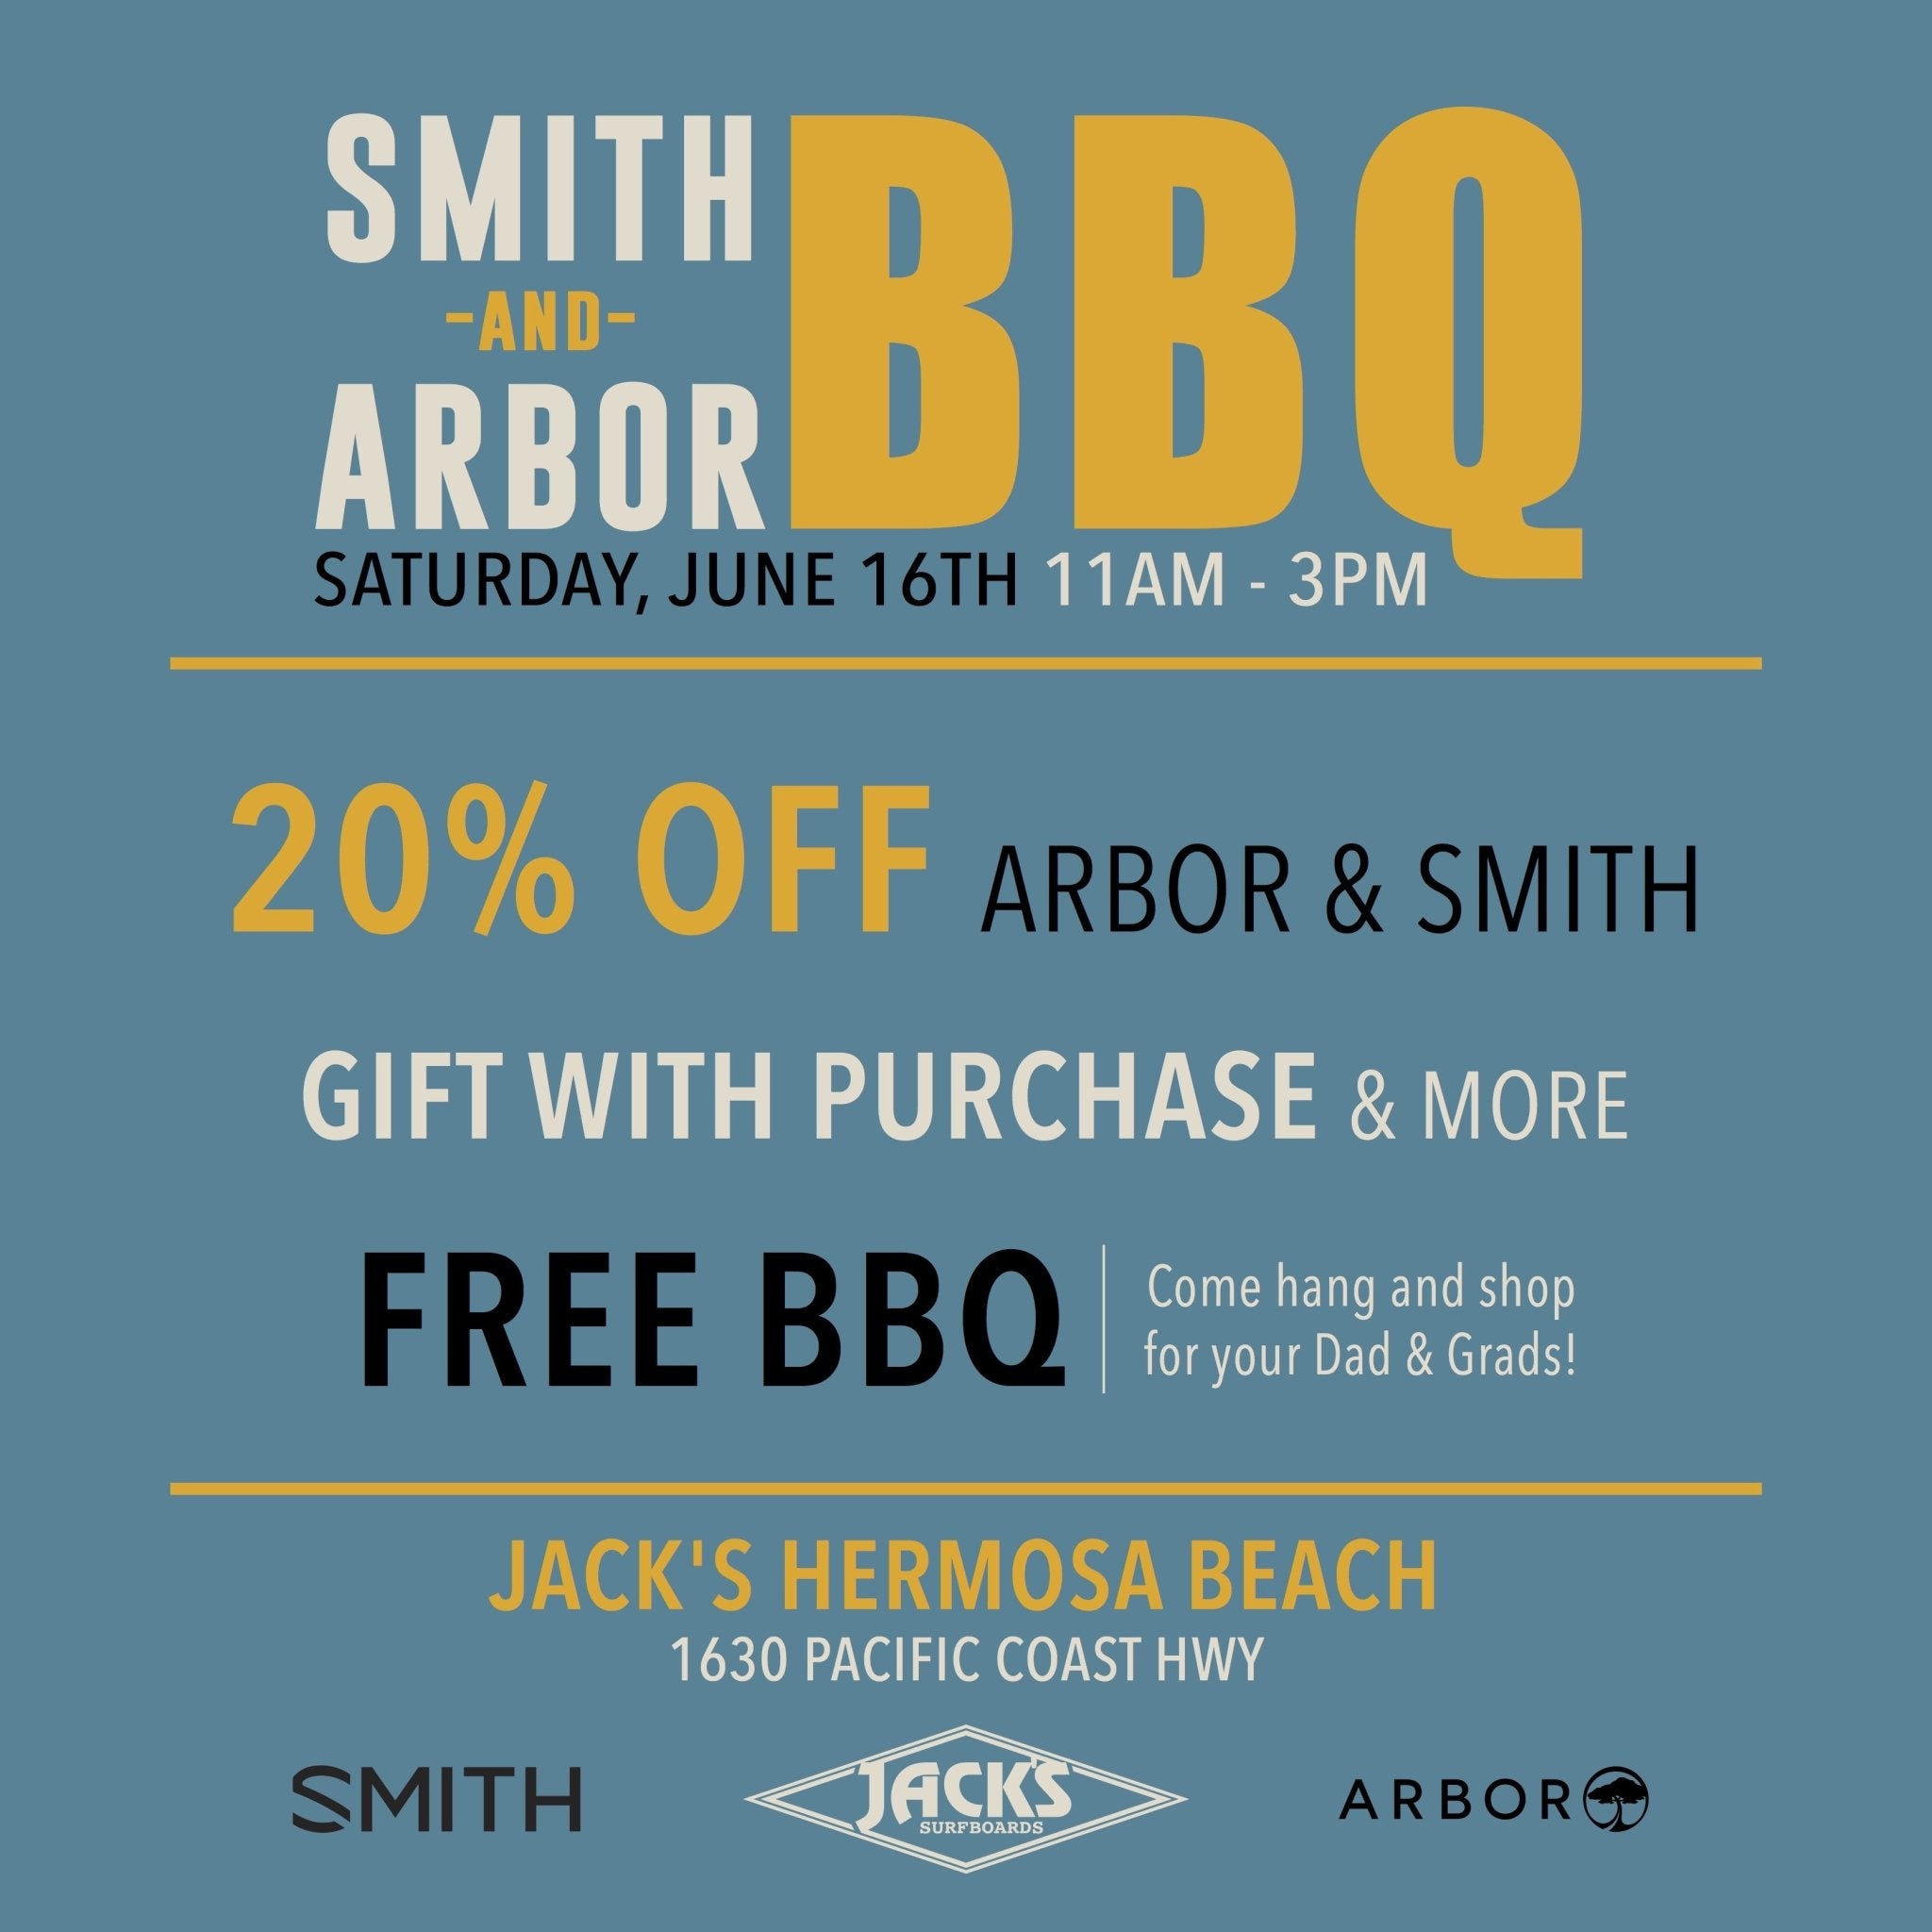 SMITH & ARBOR BBQ!! | Jack's Surfboards